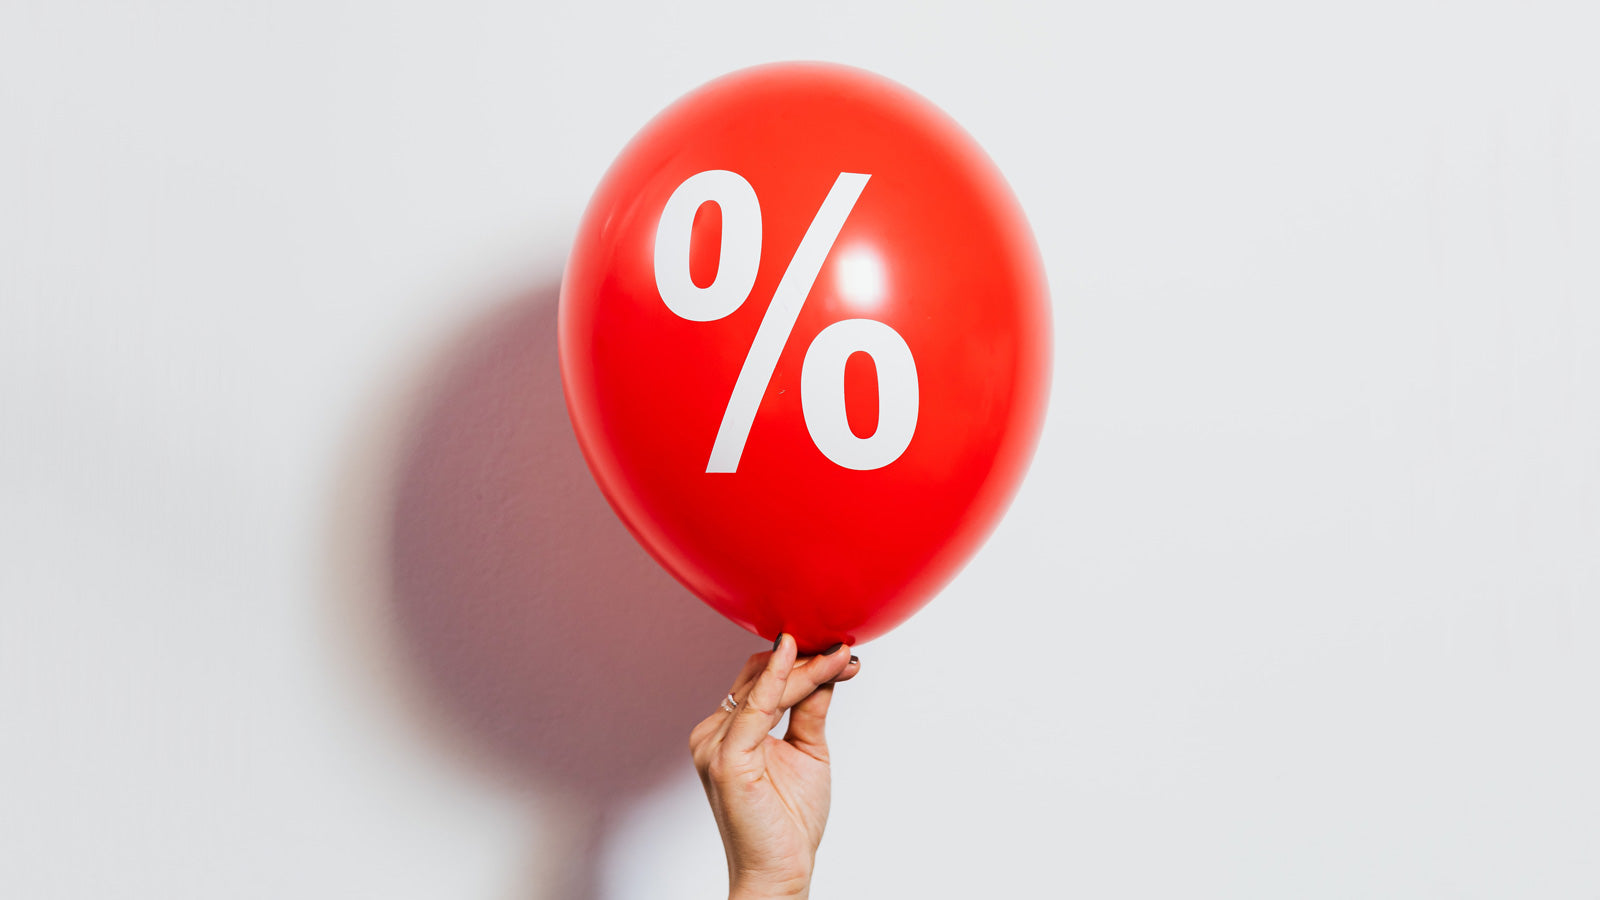 a red balloon with a percent sign printed on it held up against a white background